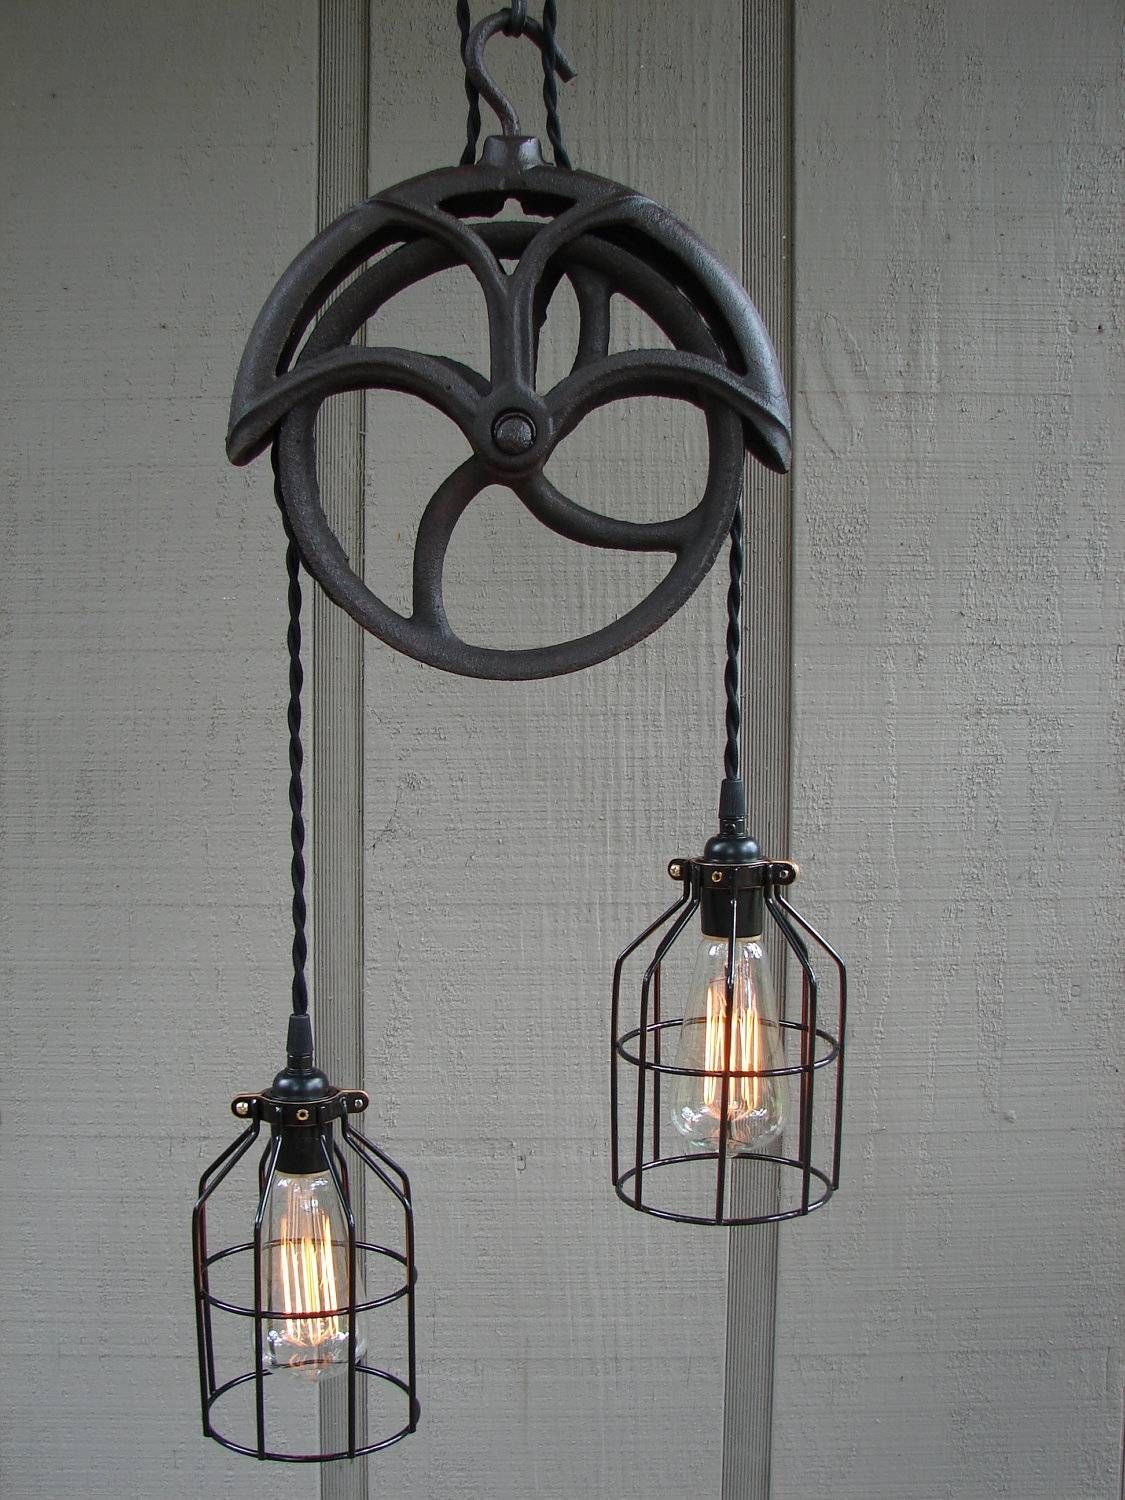 Pulley Pendant Light Fixtures – Baby Exit Throughout Pulley Pendant Lighting (View 15 of 15)